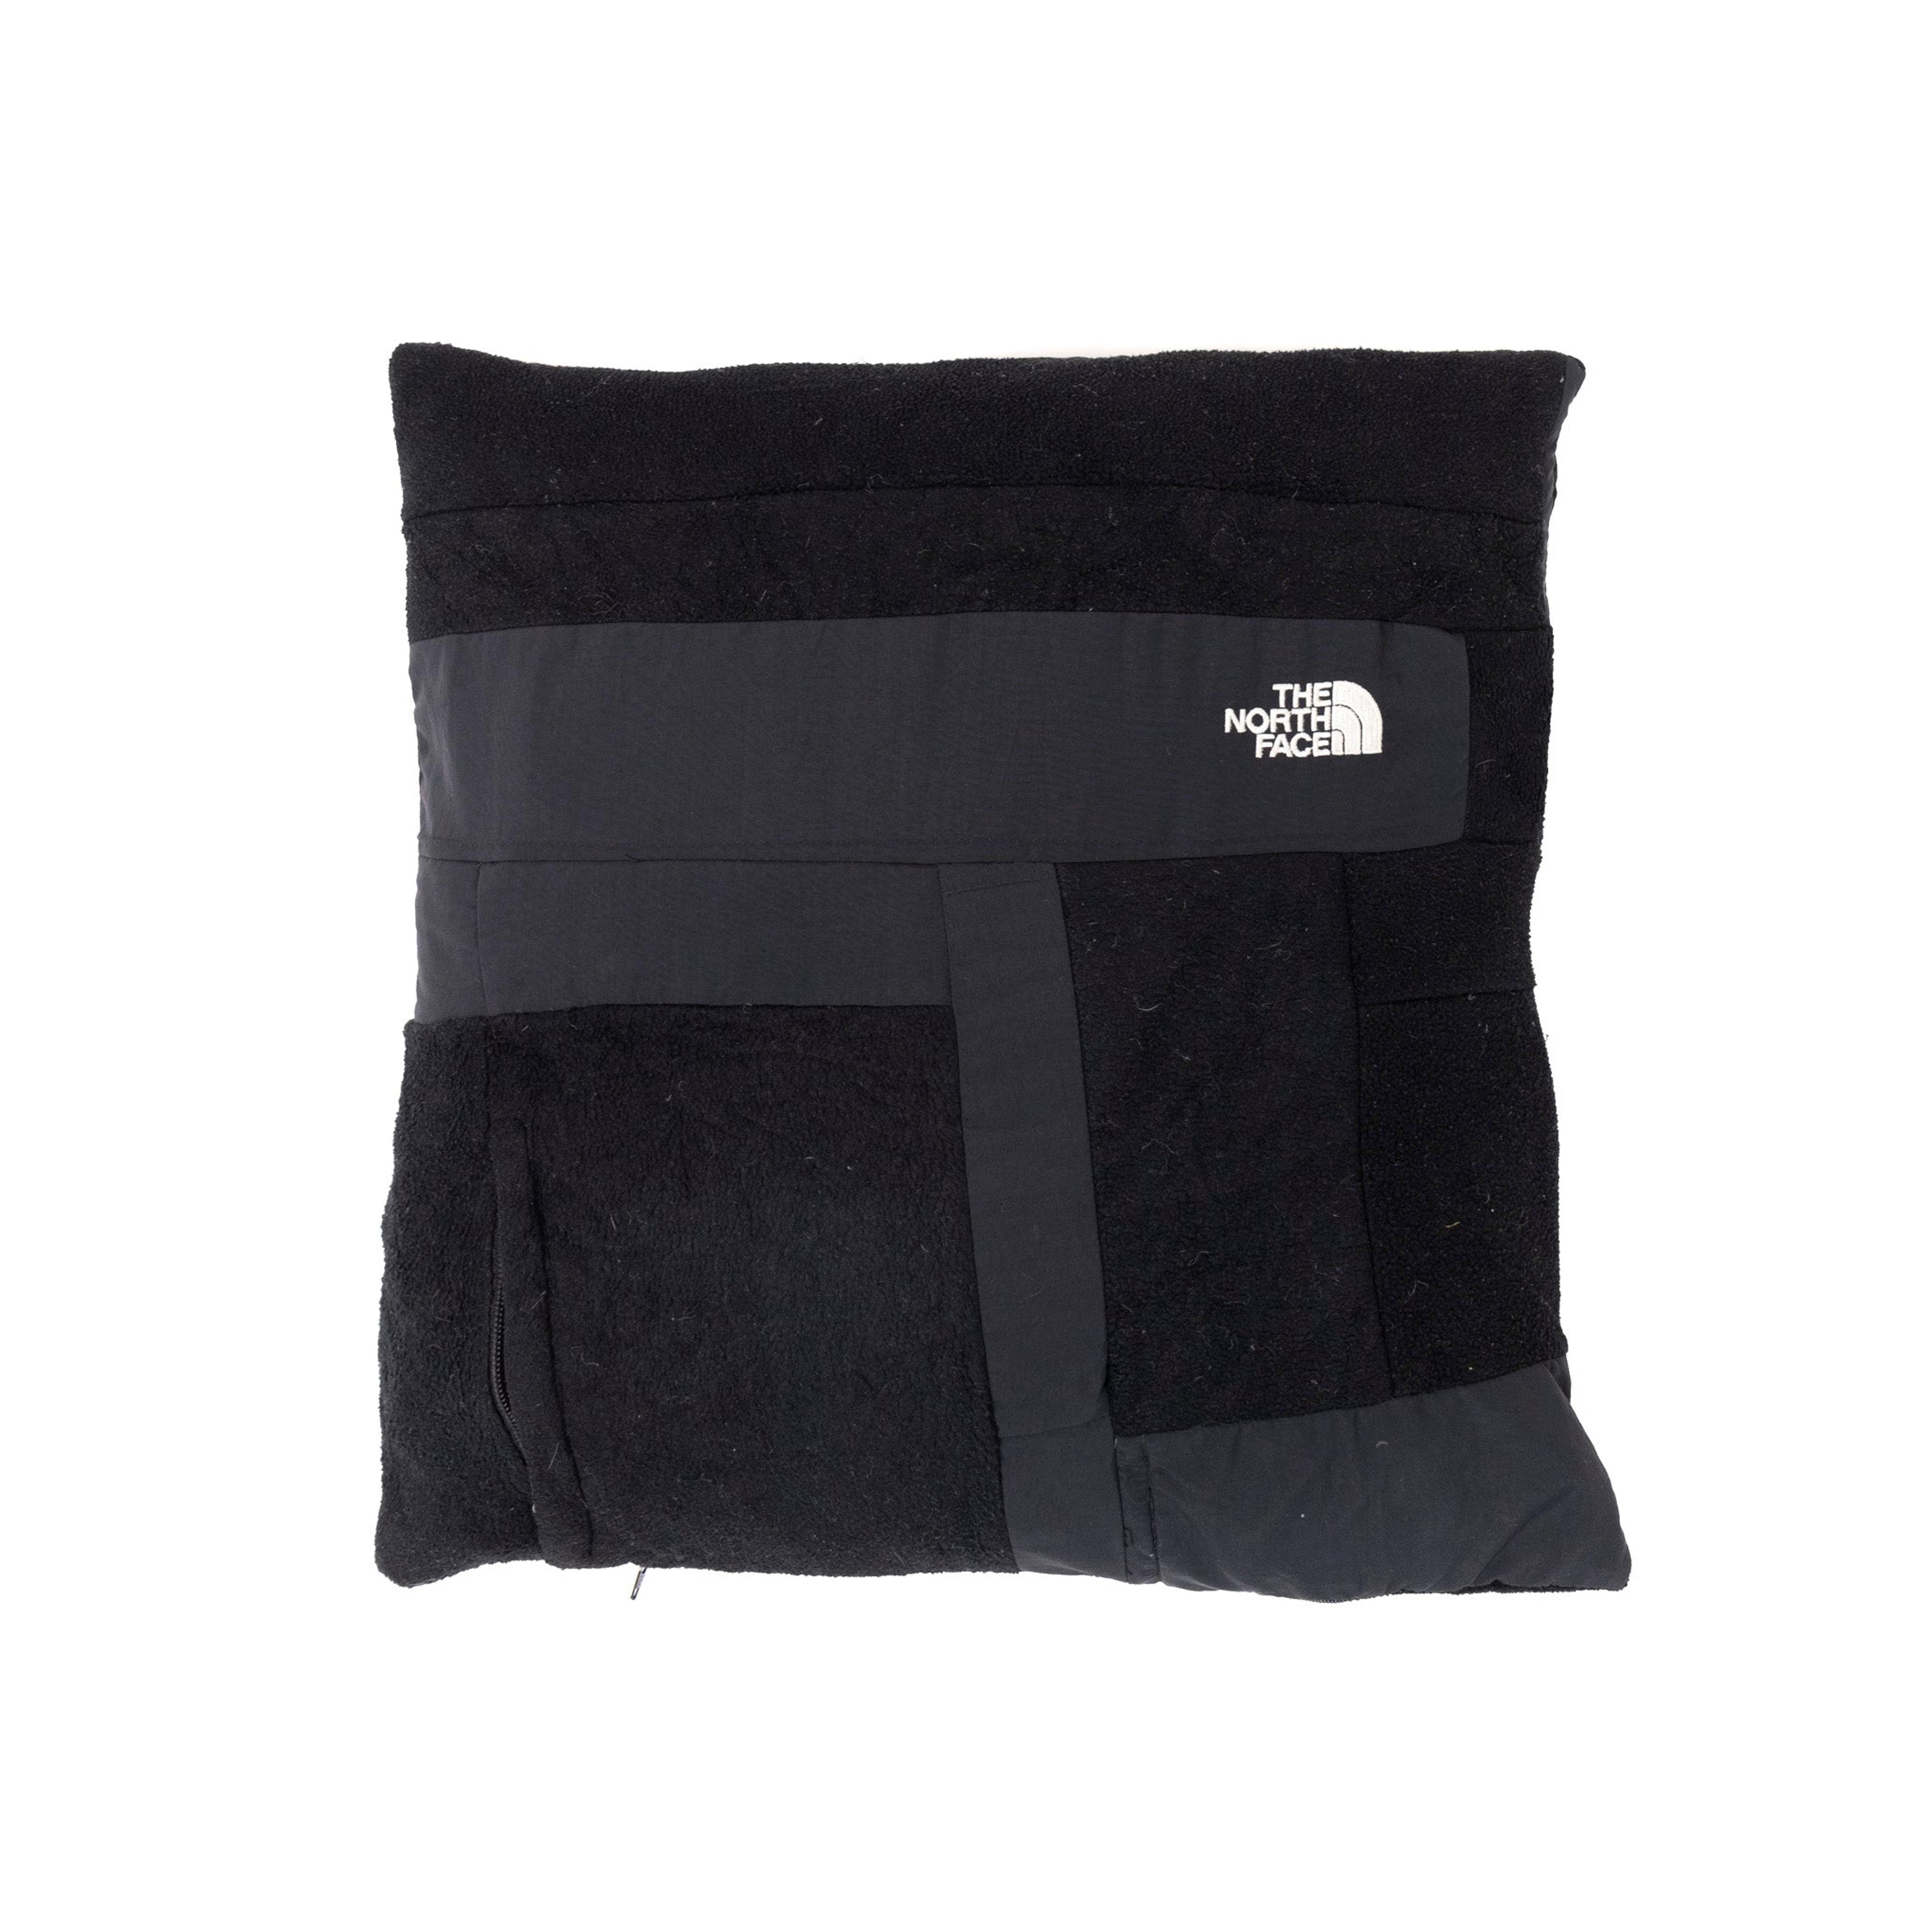 Alternate View 2 of VT Rework: The North Face Pillow